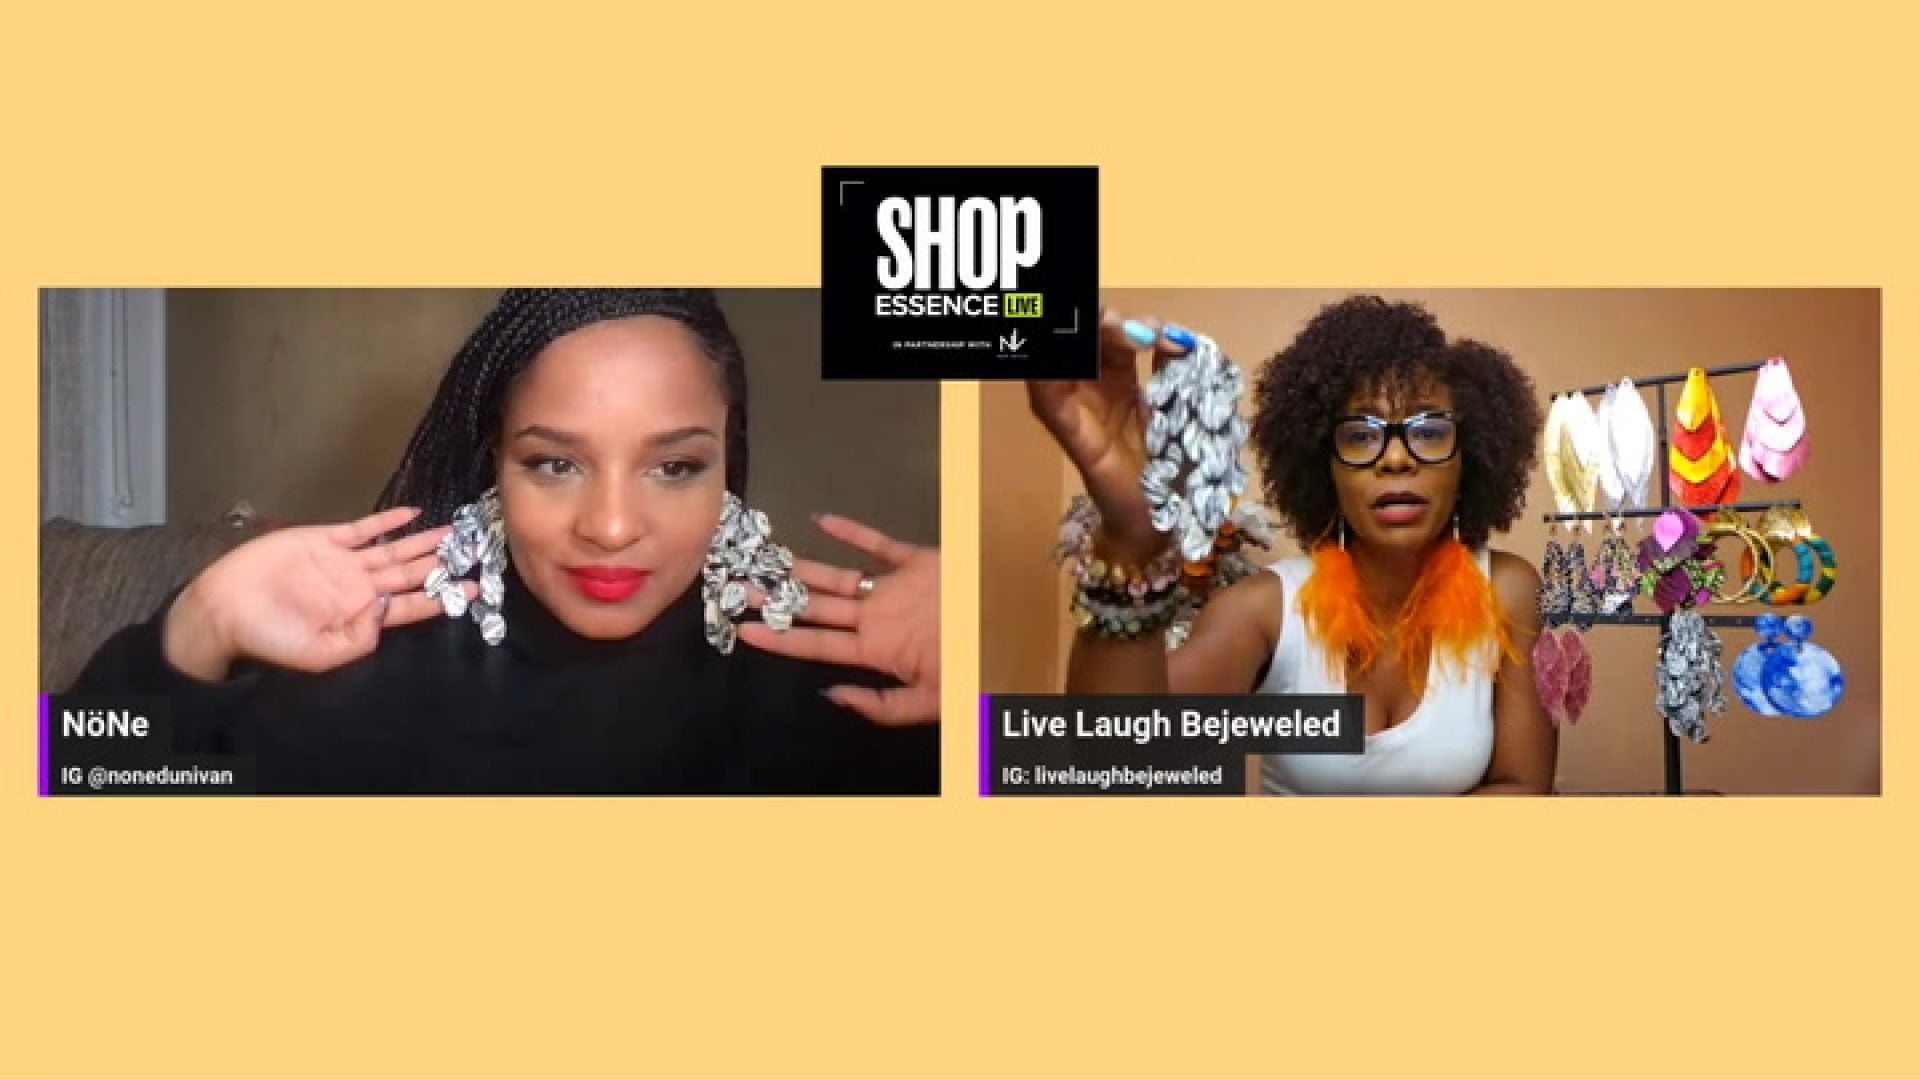 WATCH: Shop Essence Live – Check Out These Handcrafting Pieces With Live Laugh Bejeweled